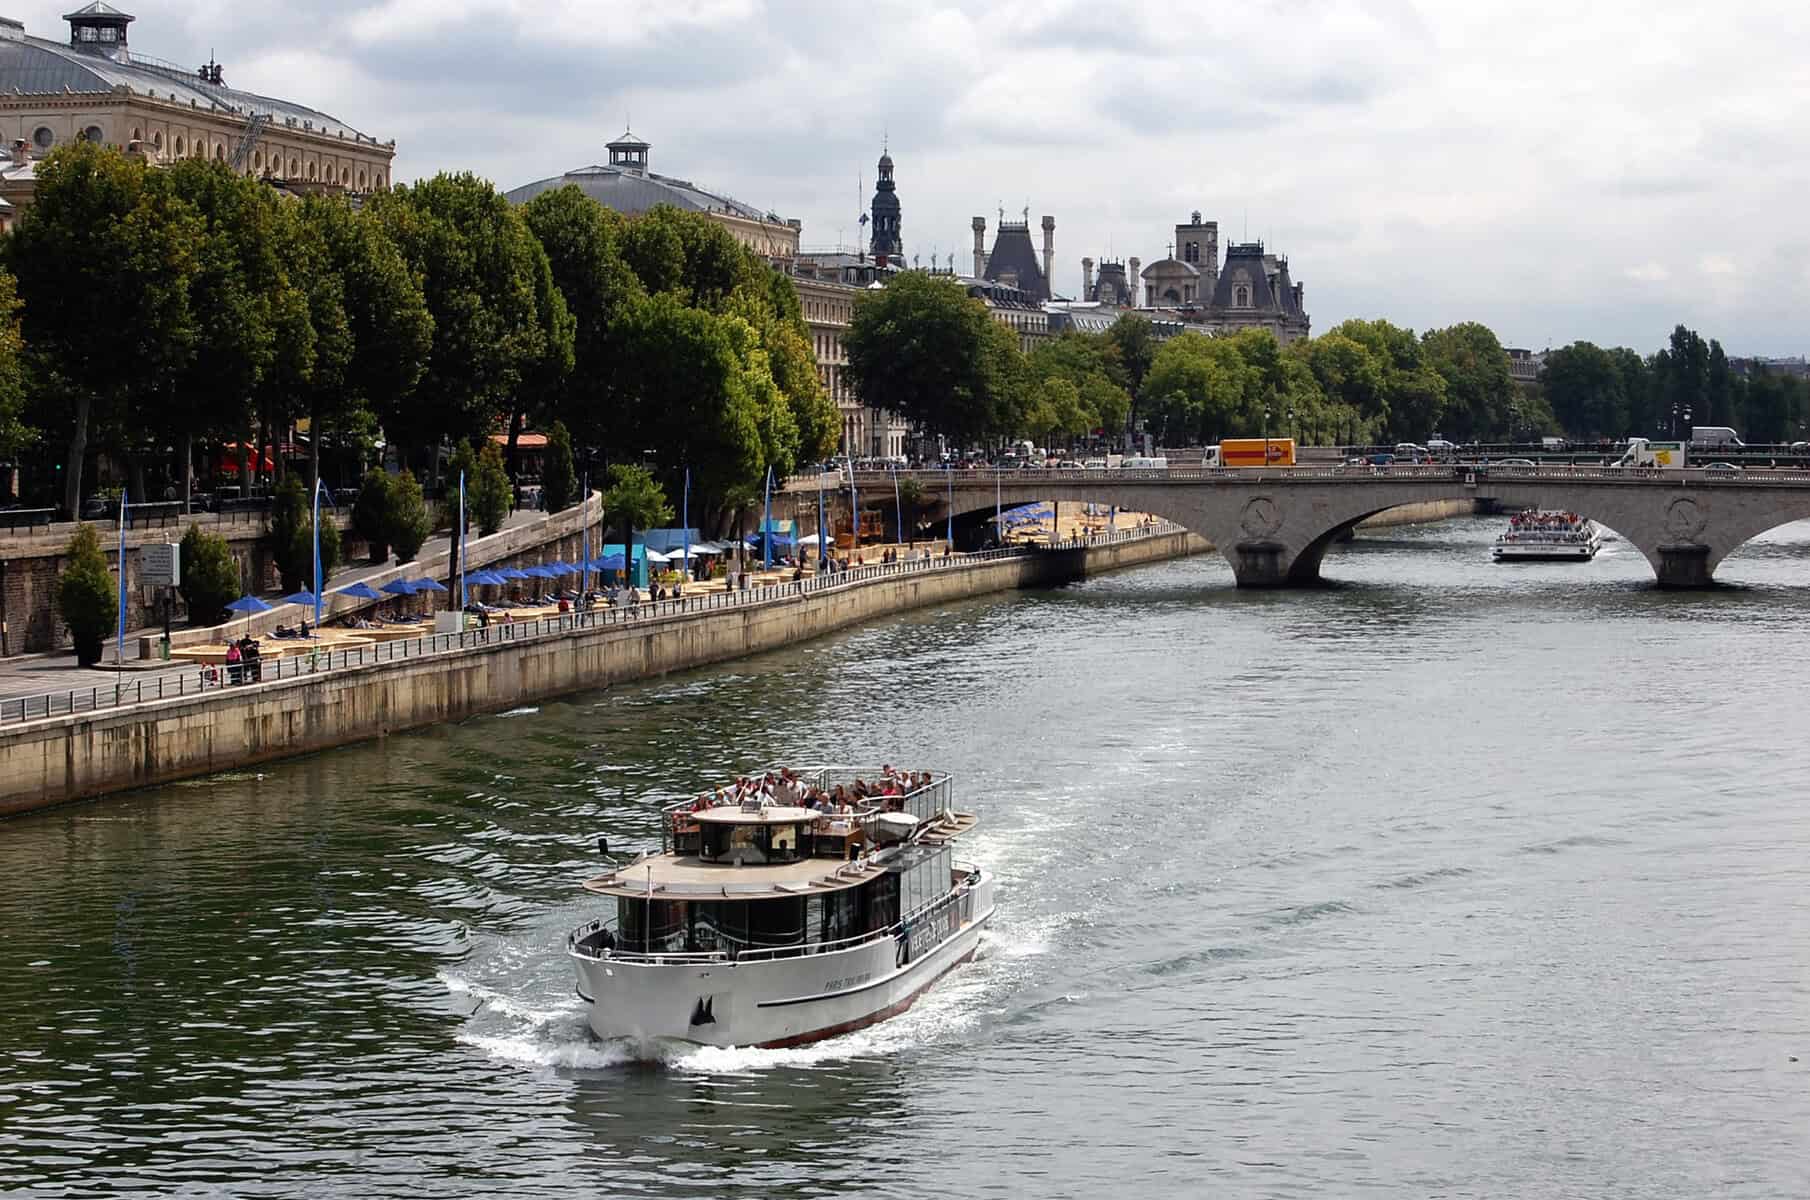 cruise on the Seine is one of the top 10 activities to do on solo travel to paris